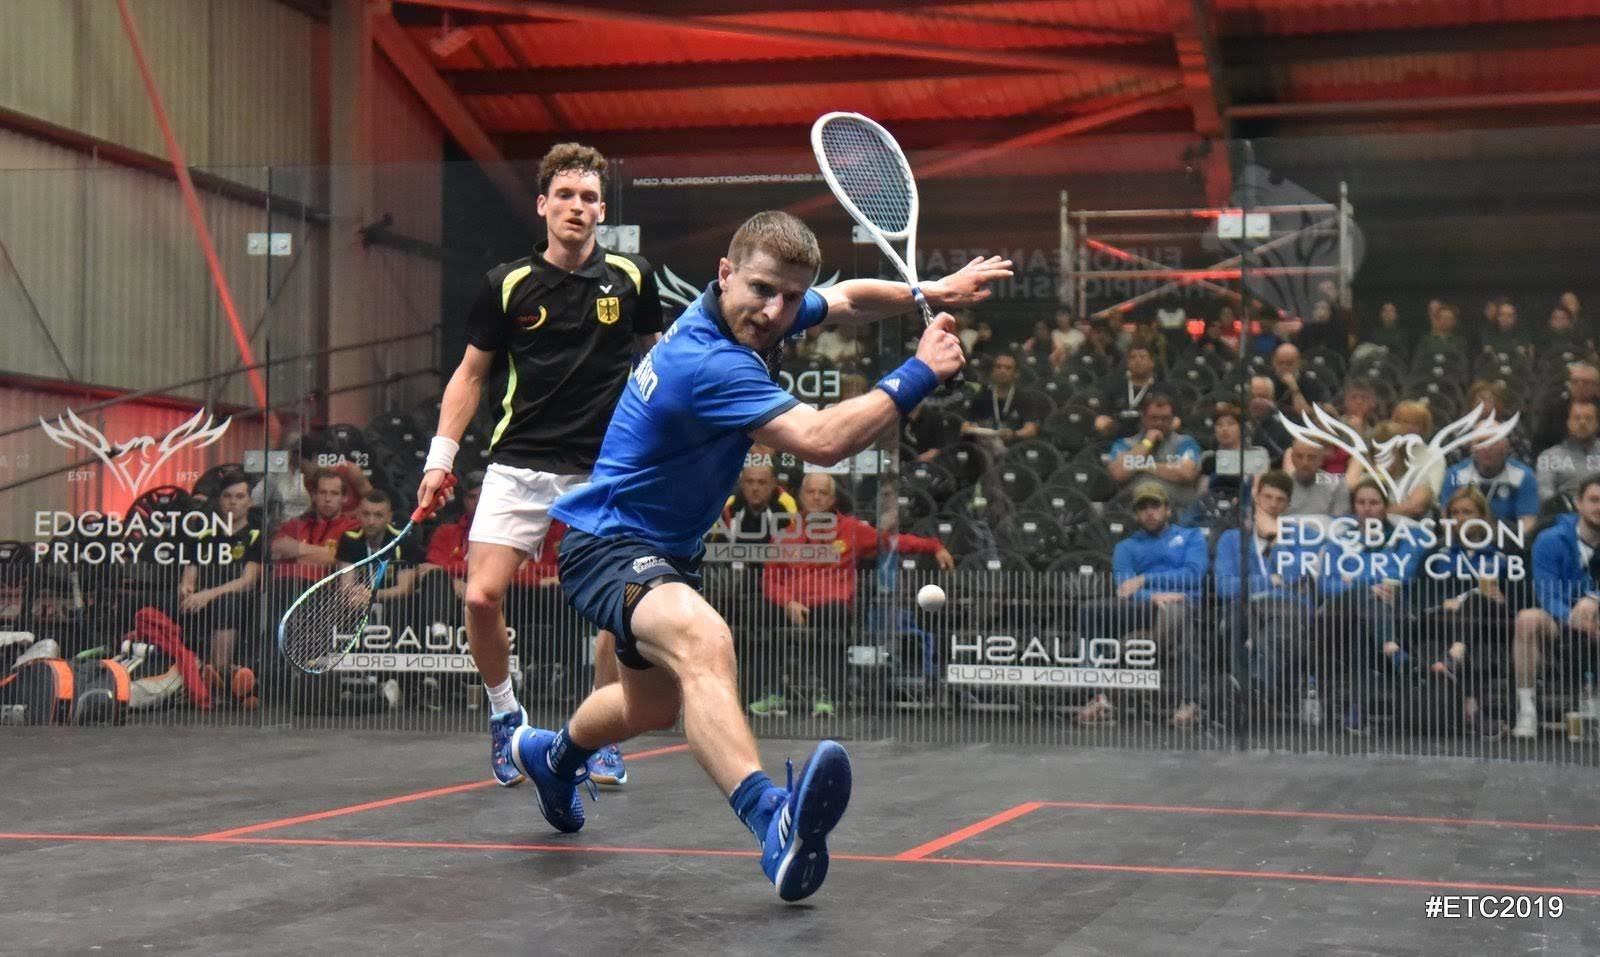 Alan Clyne defeated Lucas Serme as Scotland clinched an upset over France to win bronze at squash's European Team Championships in Birmingham.